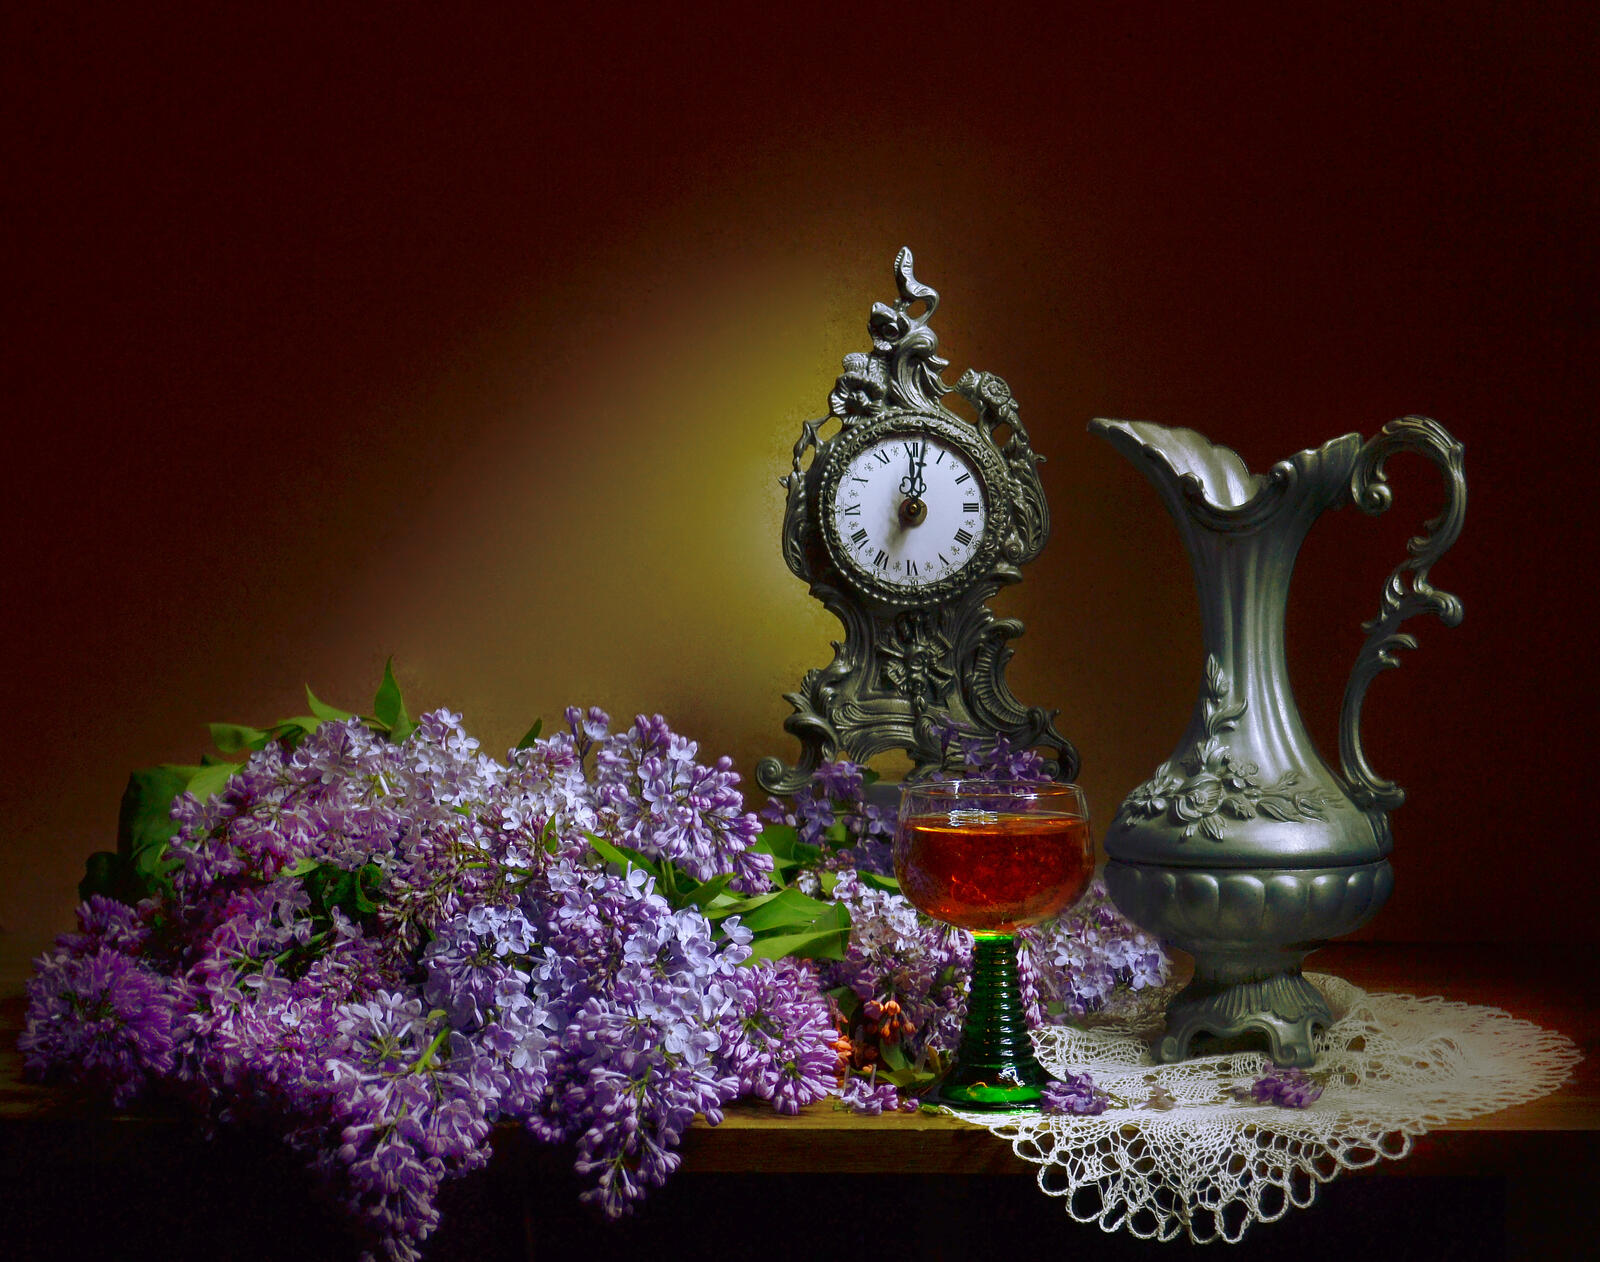 Wallpapers bouquet lilac still life on the desktop